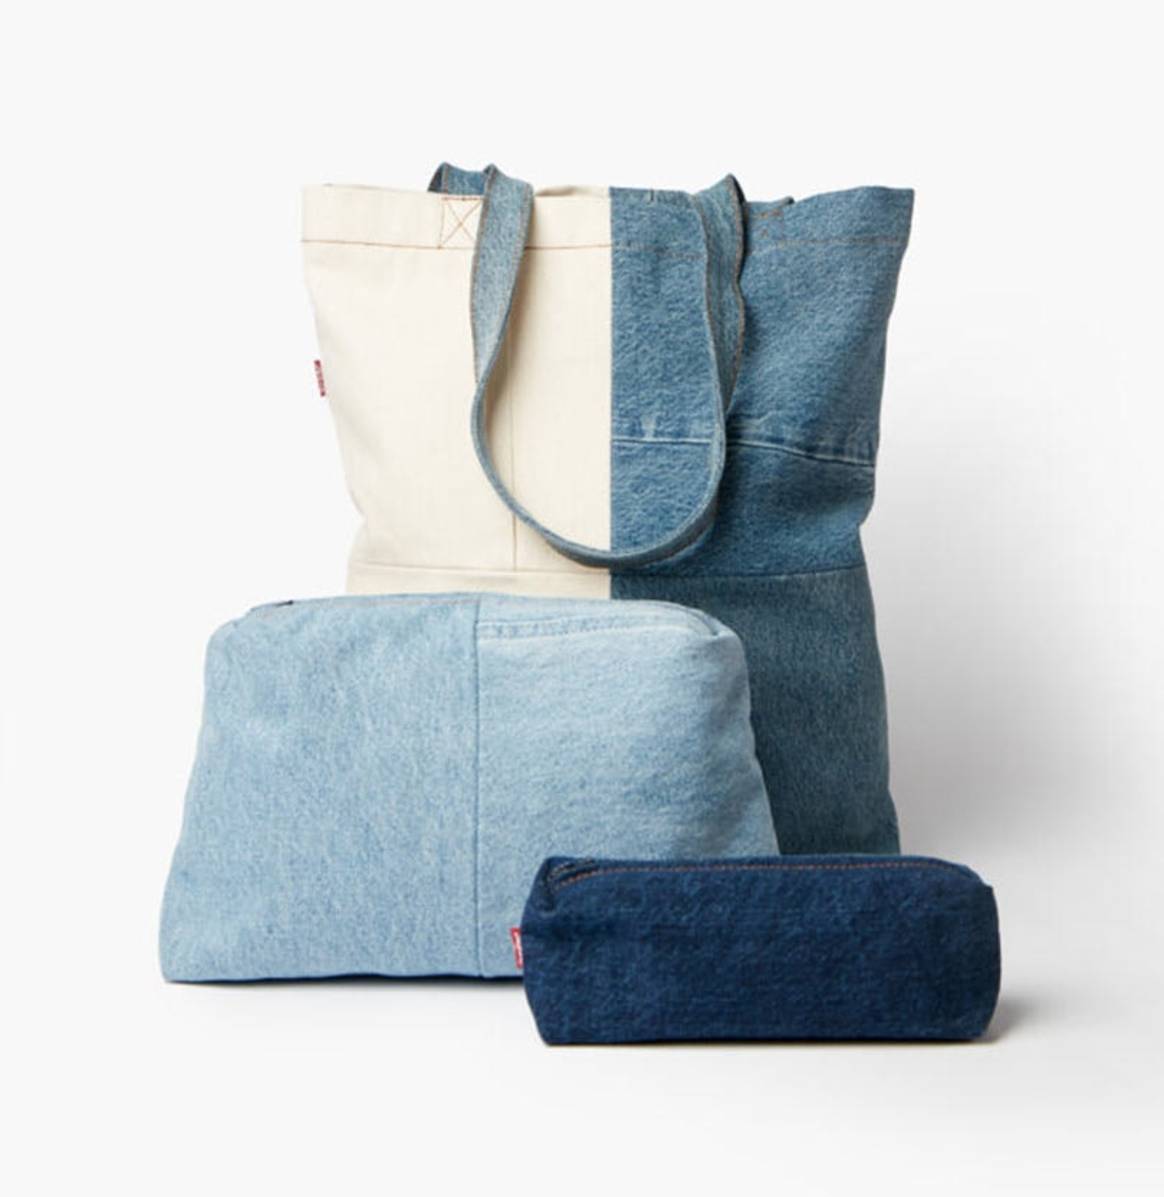 Levi's teams up with Cooperative Porto Alegre for recycled denim collection